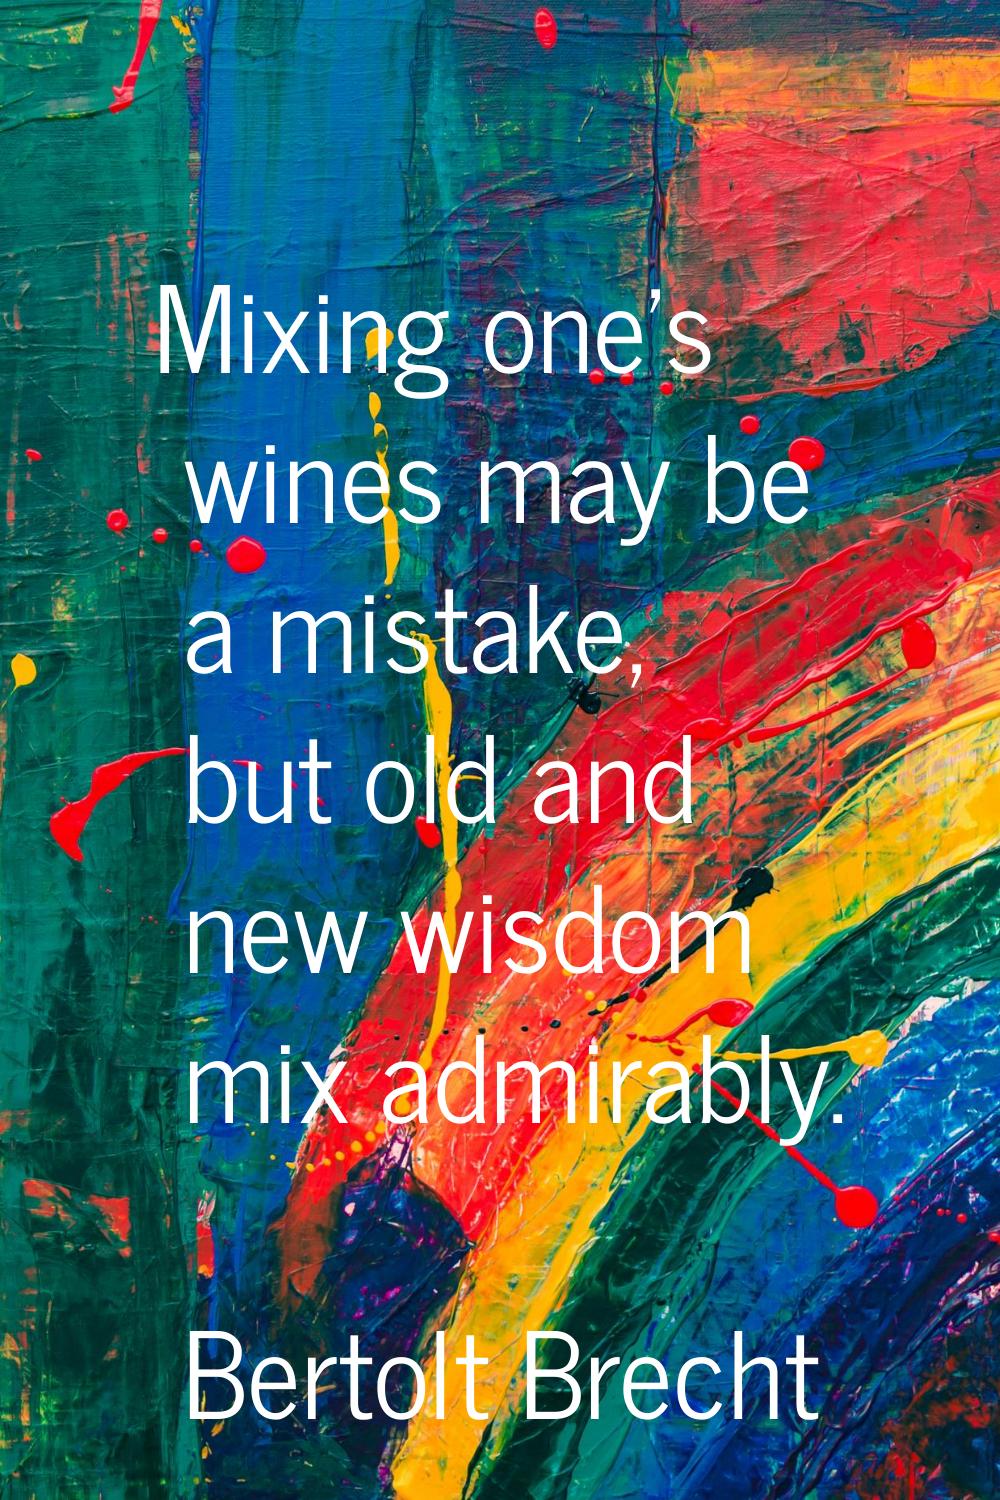 Mixing one's wines may be a mistake, but old and new wisdom mix admirably.